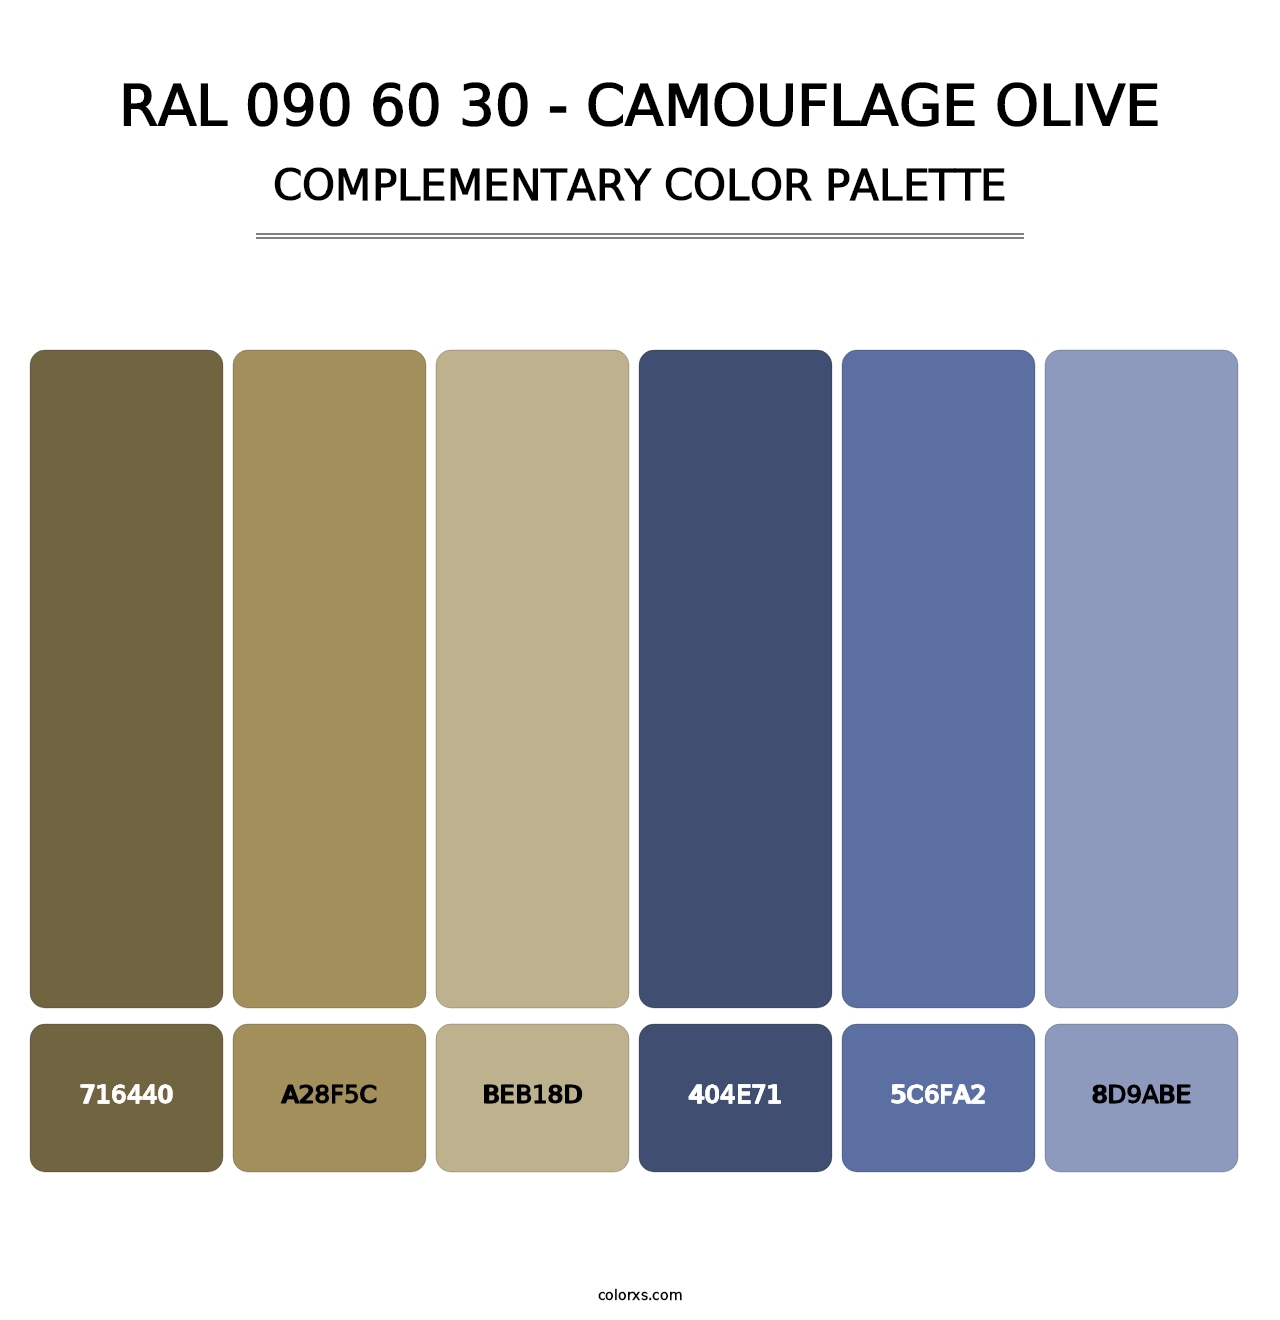 RAL 090 60 30 - Camouflage Olive - Complementary Color Palette